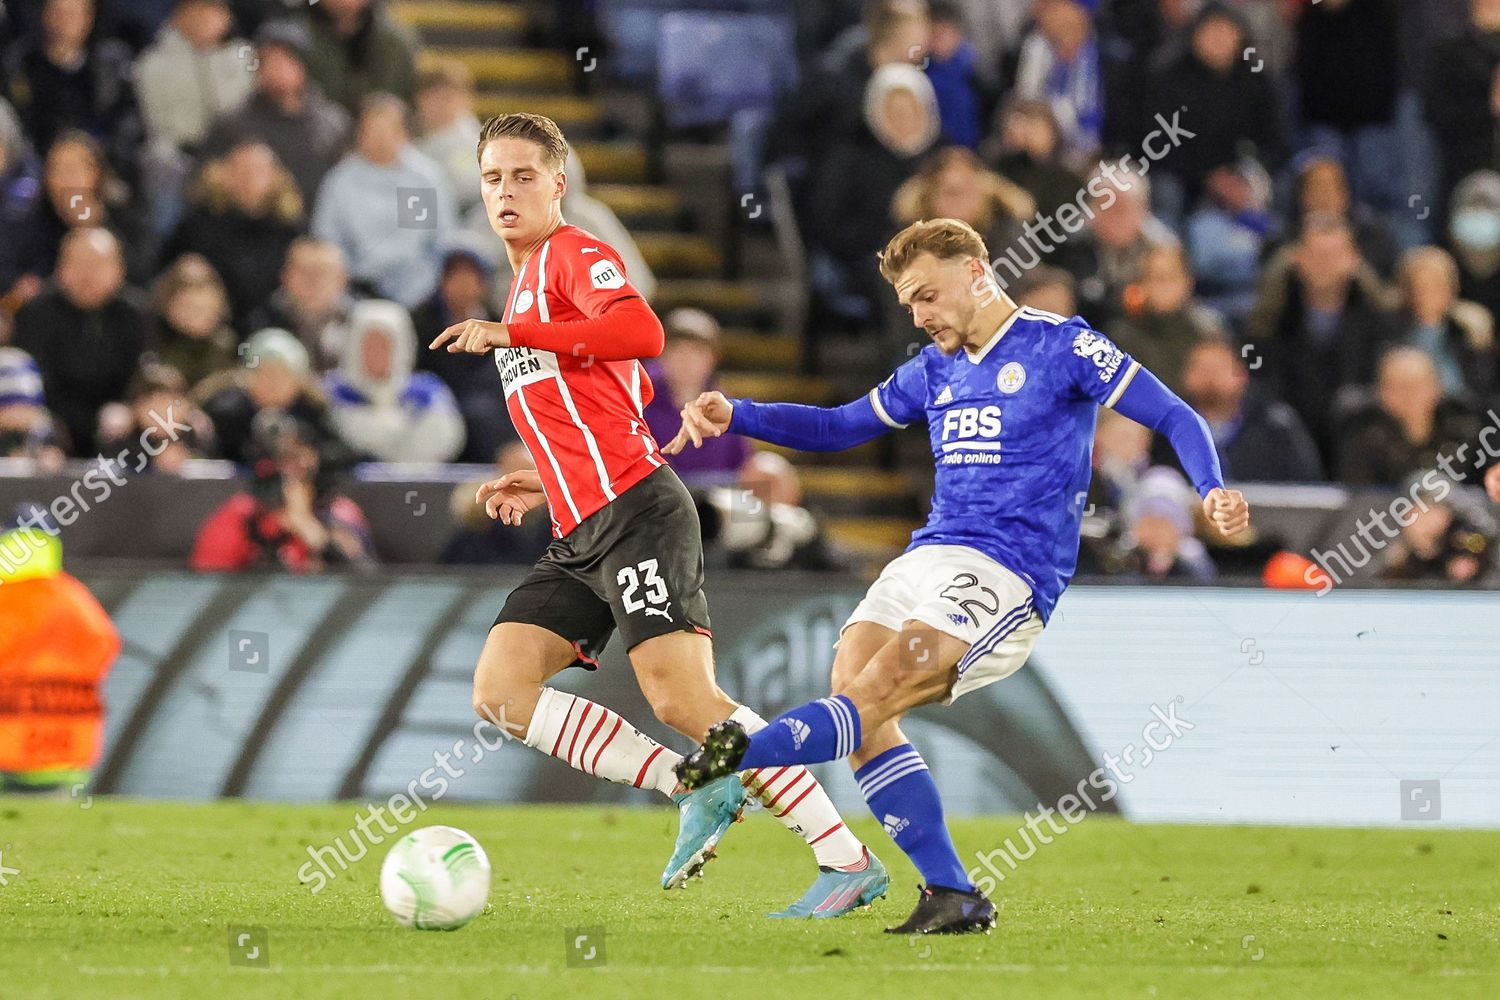  Kiernan Dewsbury-Hall in action during the Europa Conference League match between Leicester City and PSV Eindhoven, amid transfer rumours linking him with a move to Chelsea.